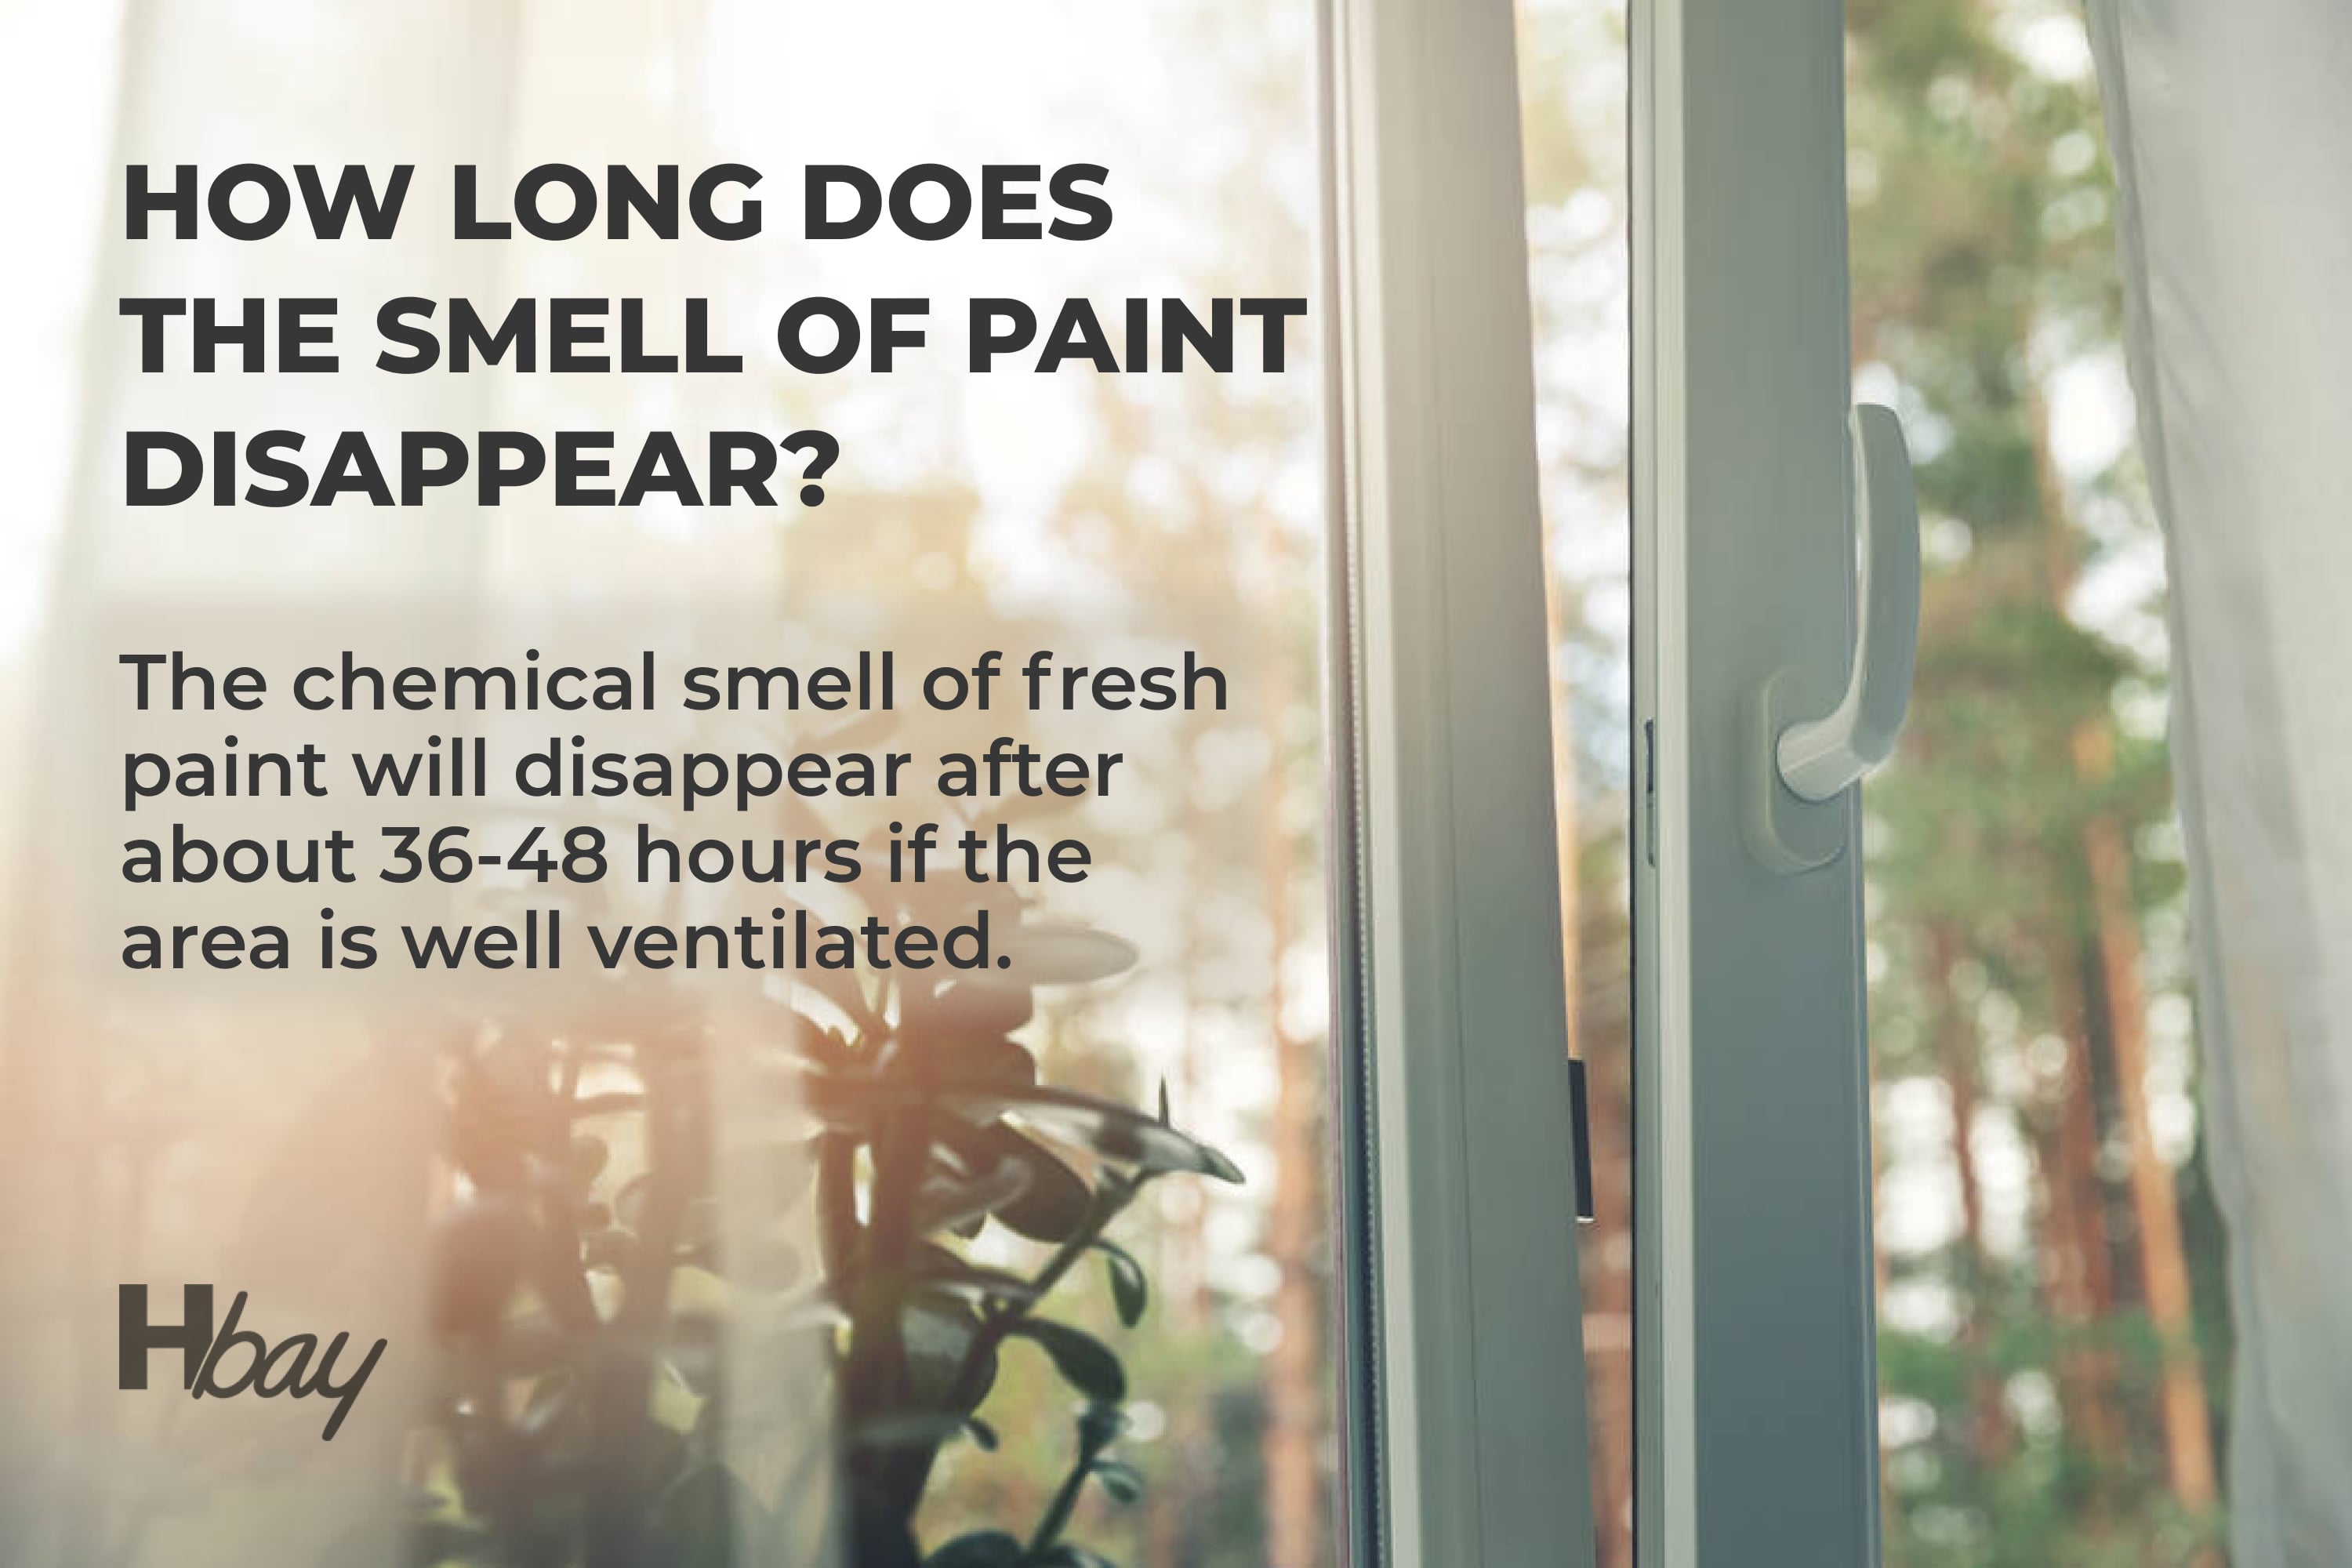 How long does the smell of paint disappear